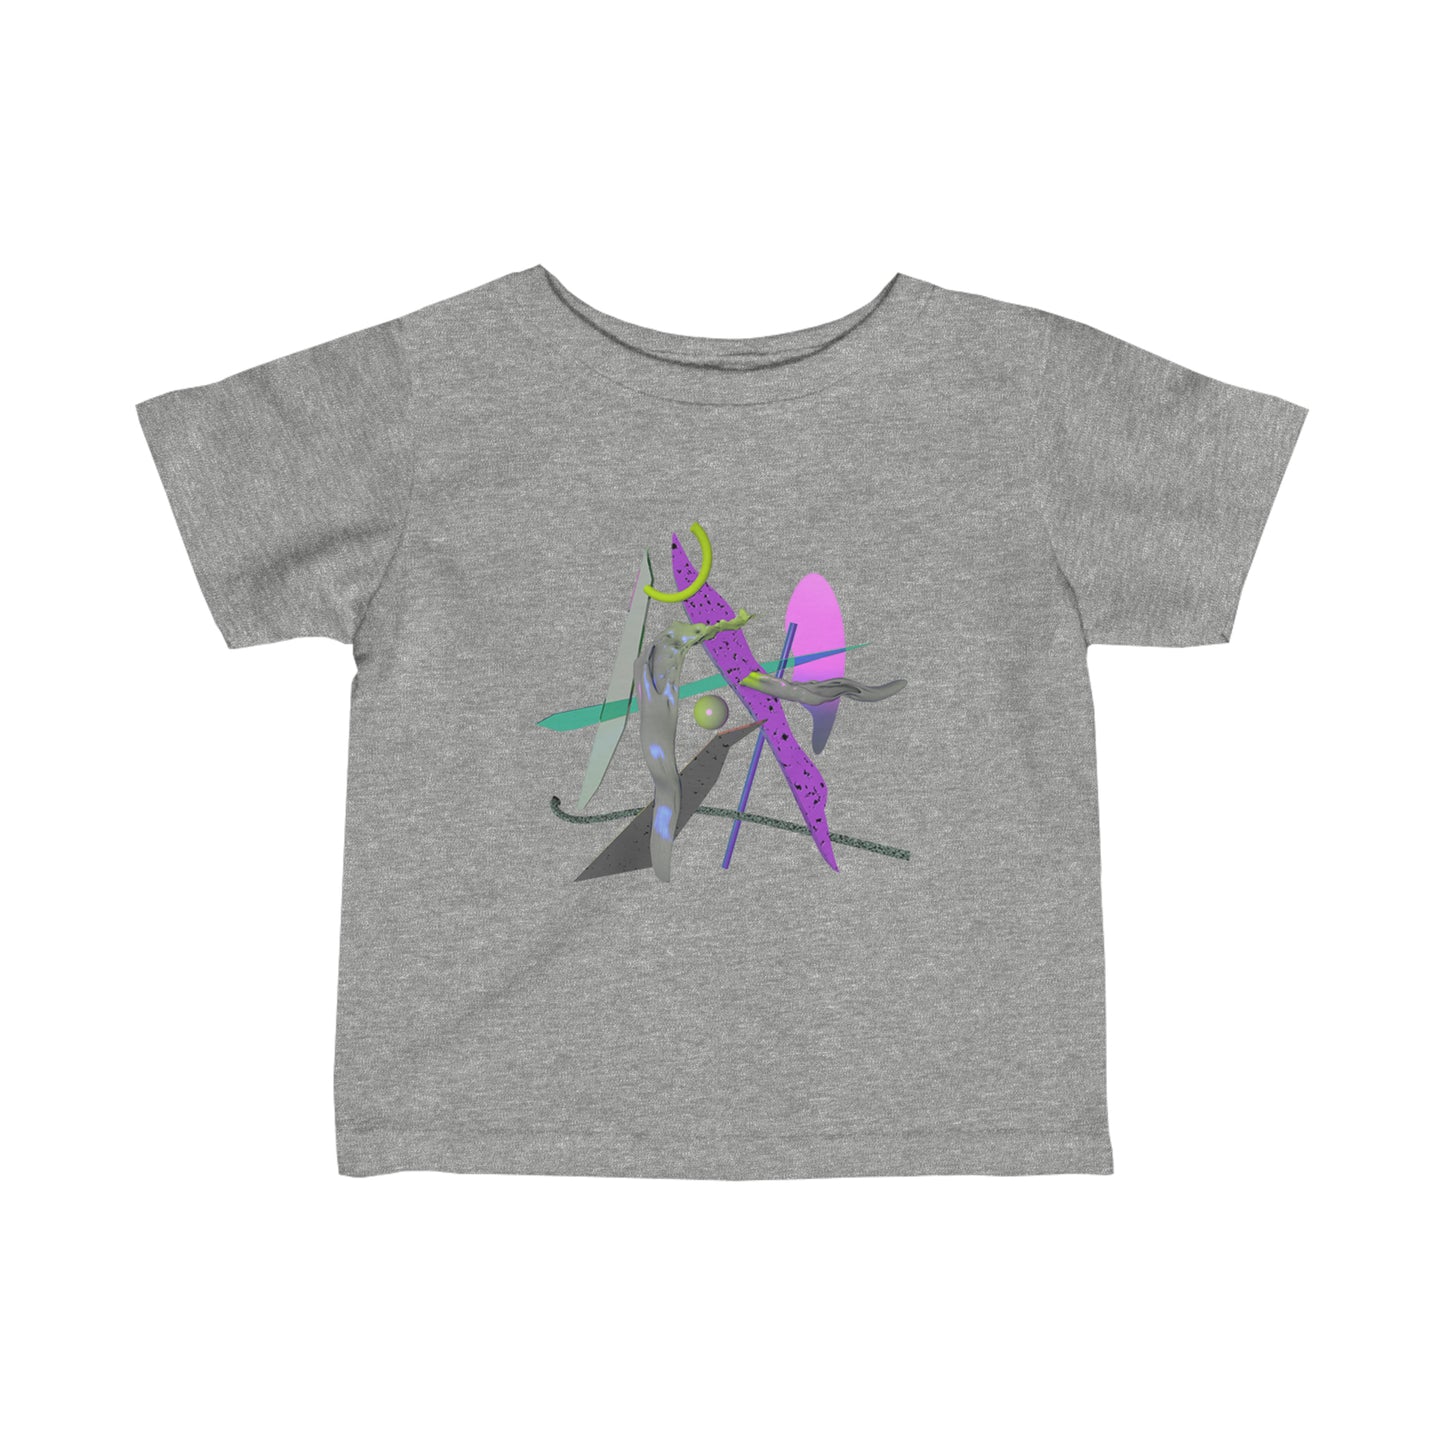 Post-Abstract Infant T-Shirt